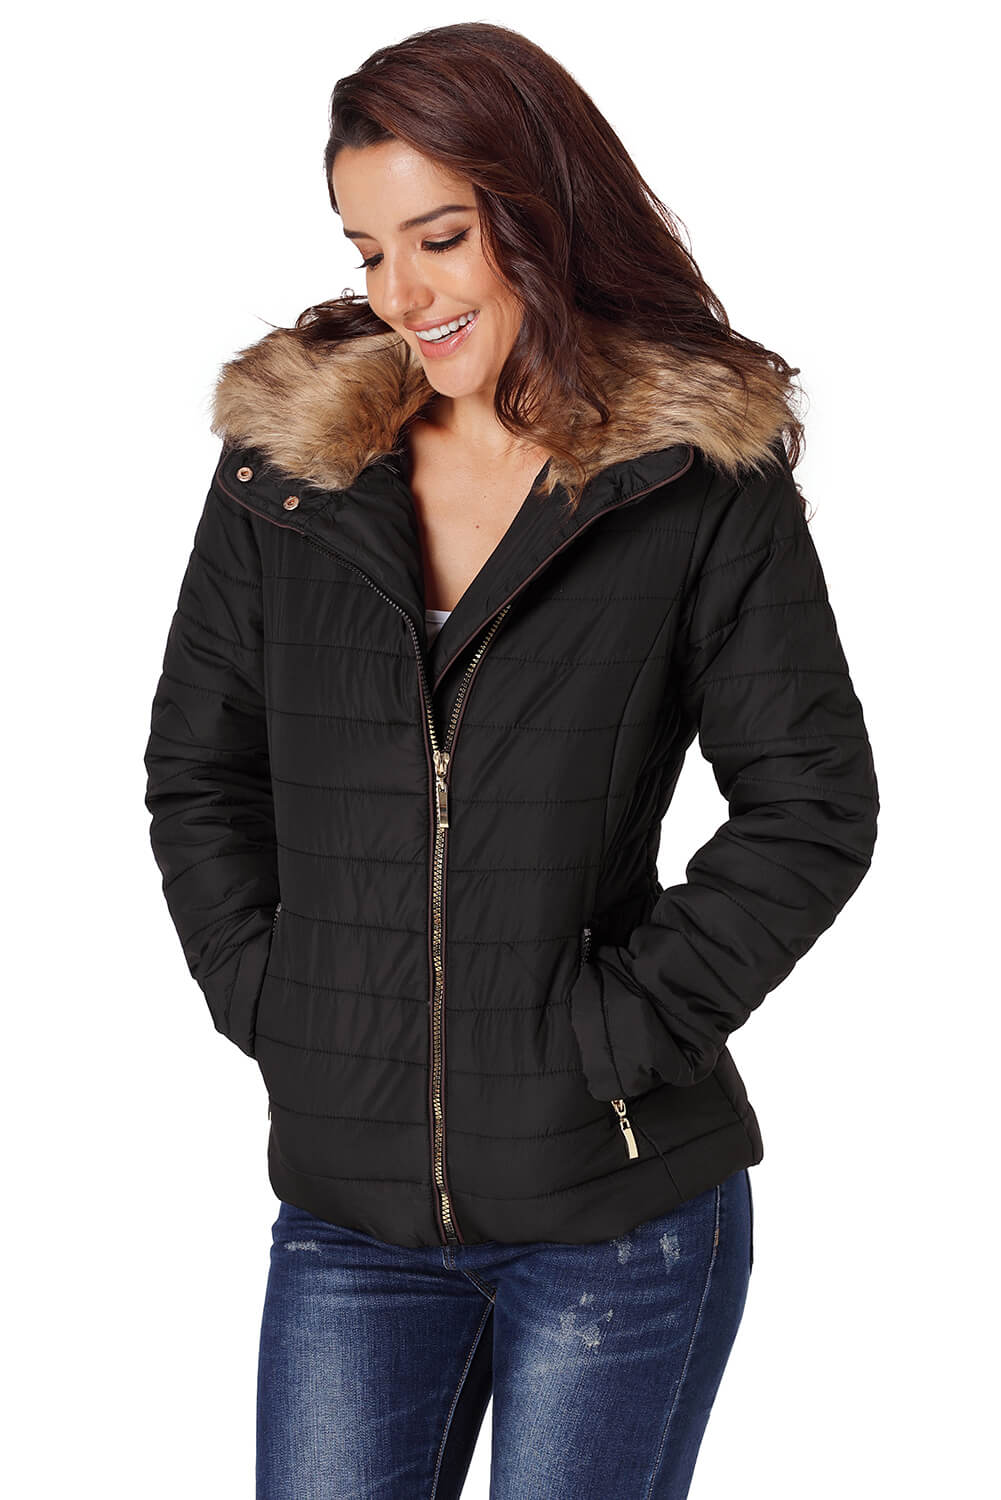 LC85117-2XXL, LC85117-2XL, LC85117-2L, LC85117-2M, LC85117-2S, Winter Coats for Women Camel Faux Fur Collar Trim Black Quilted Jacket Outerwear